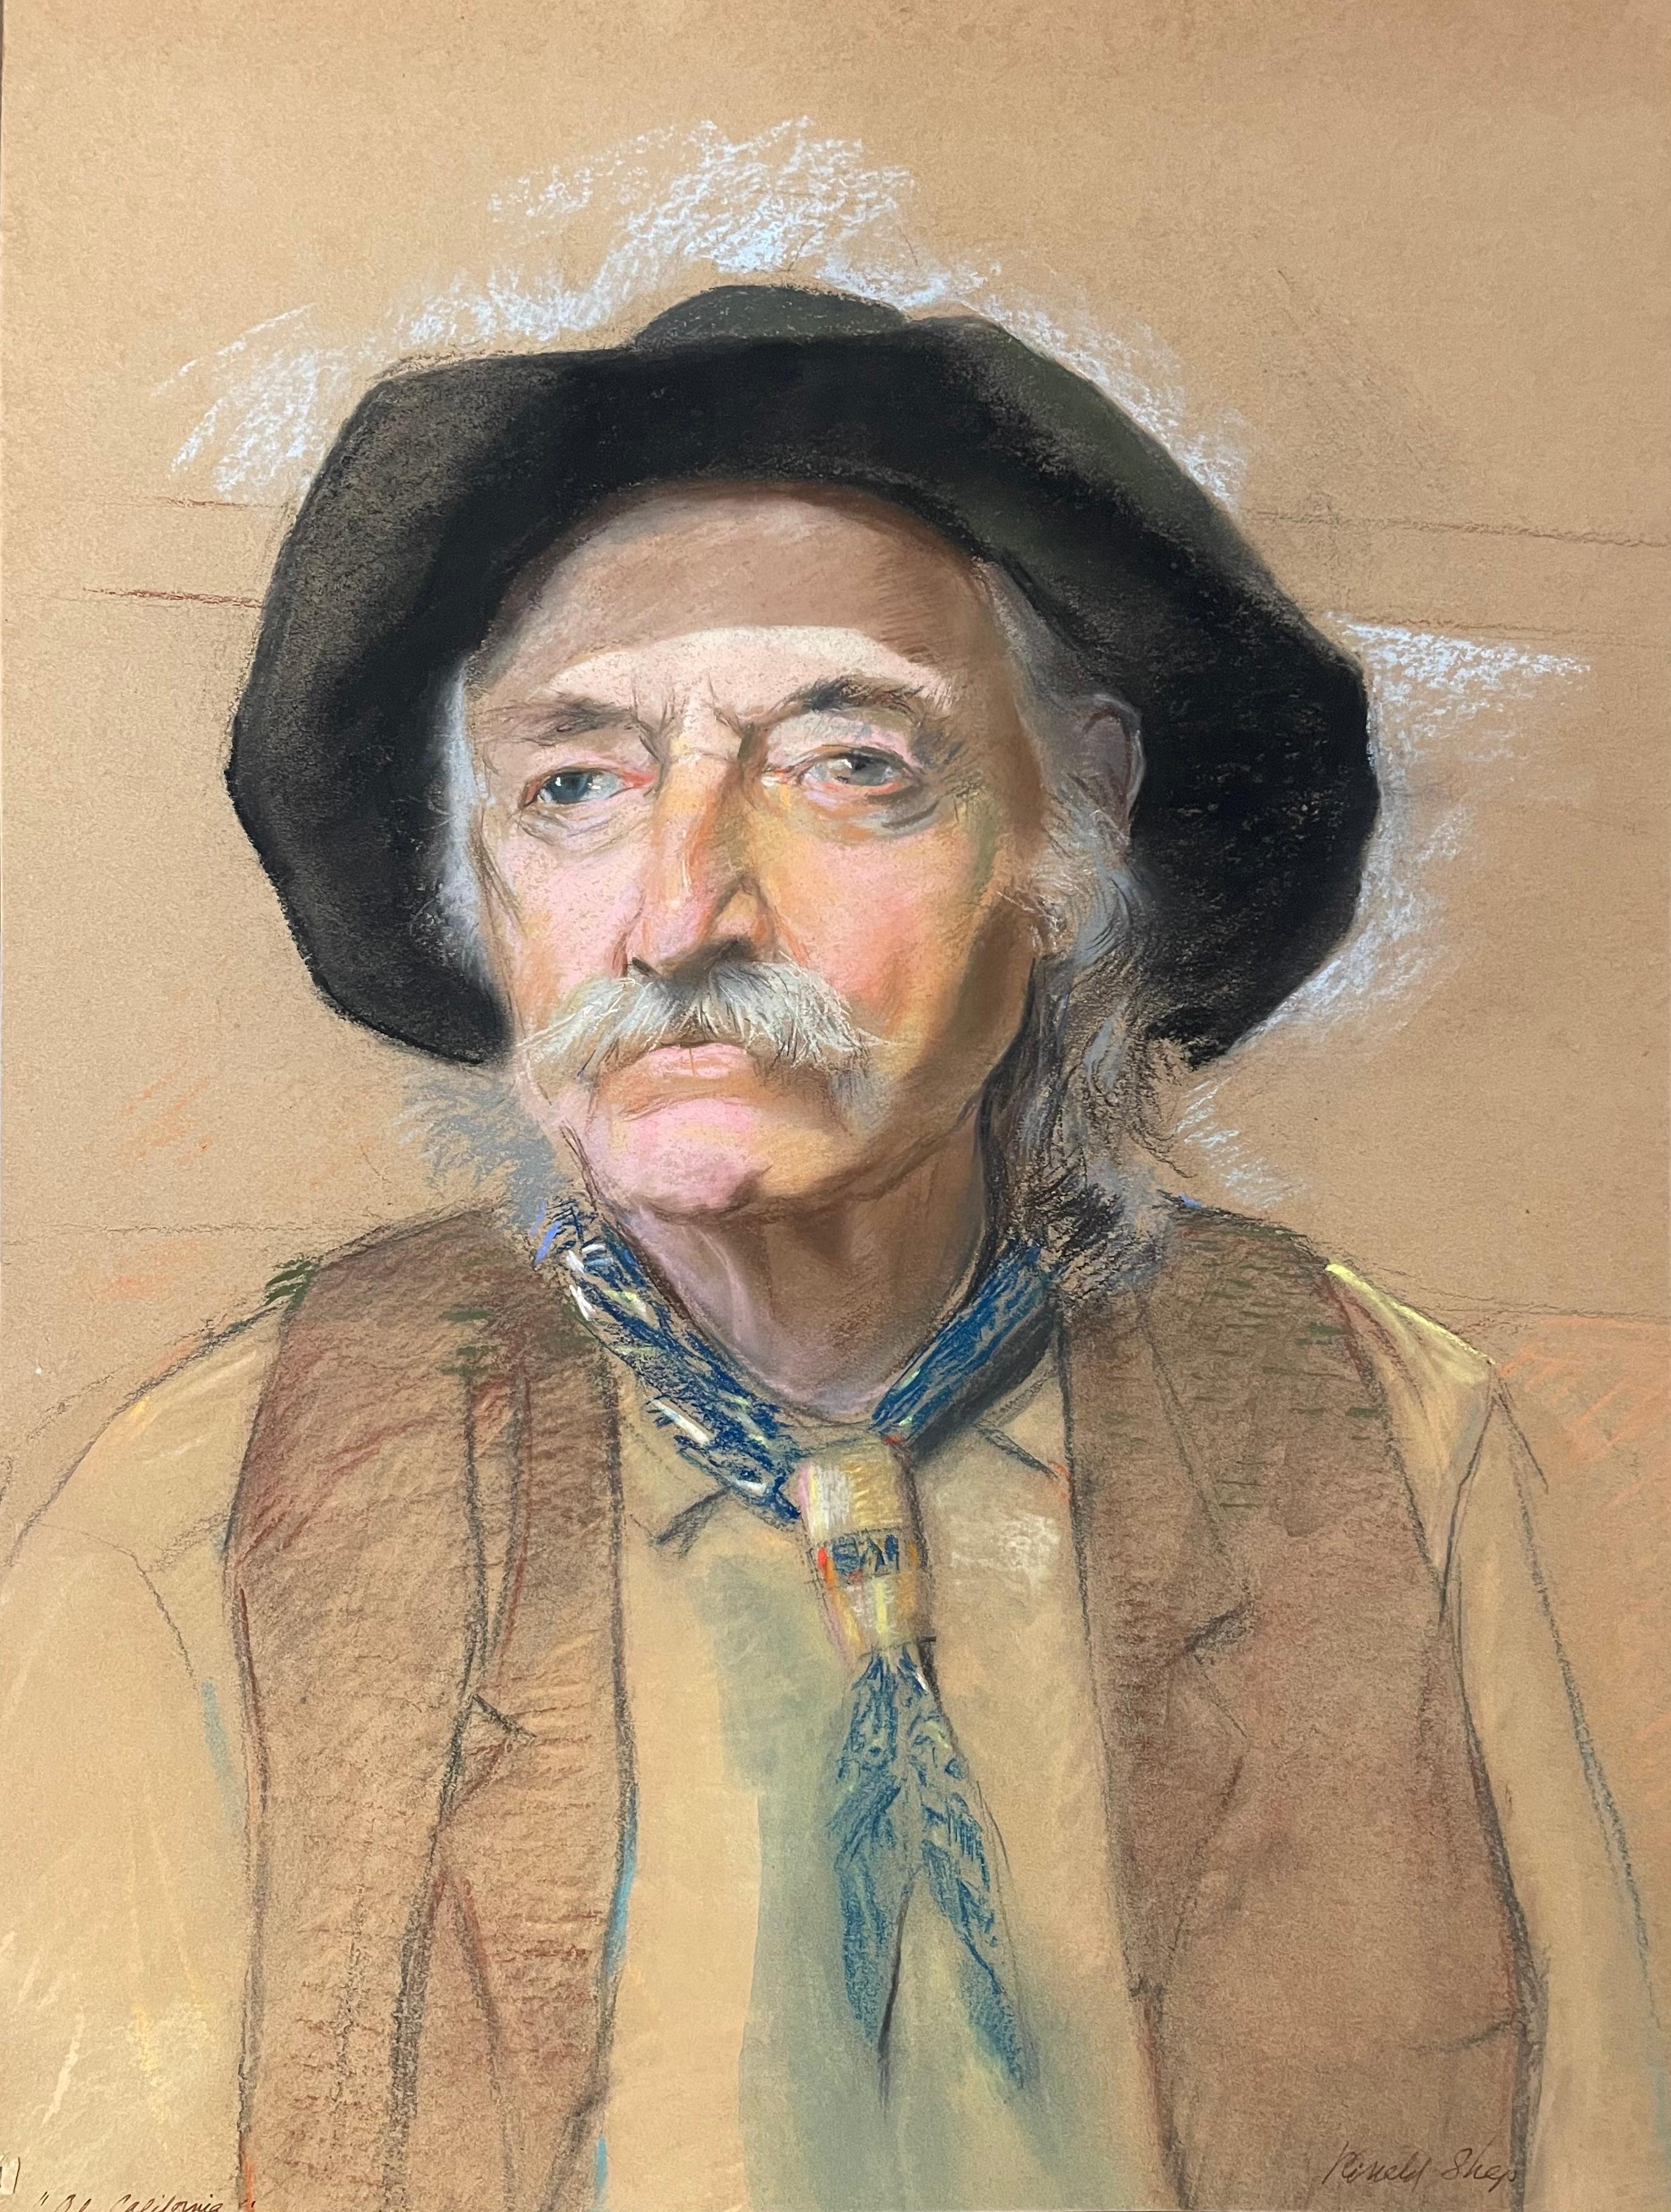 Original oil pastel character portrait by celebrated, twentieth-century California landscape painter, Ronald Shap. "Ol' California."  17x23 inches. Signed.

Only flaw to note is one chip in edge of paper, as pictured. Should not be visible when